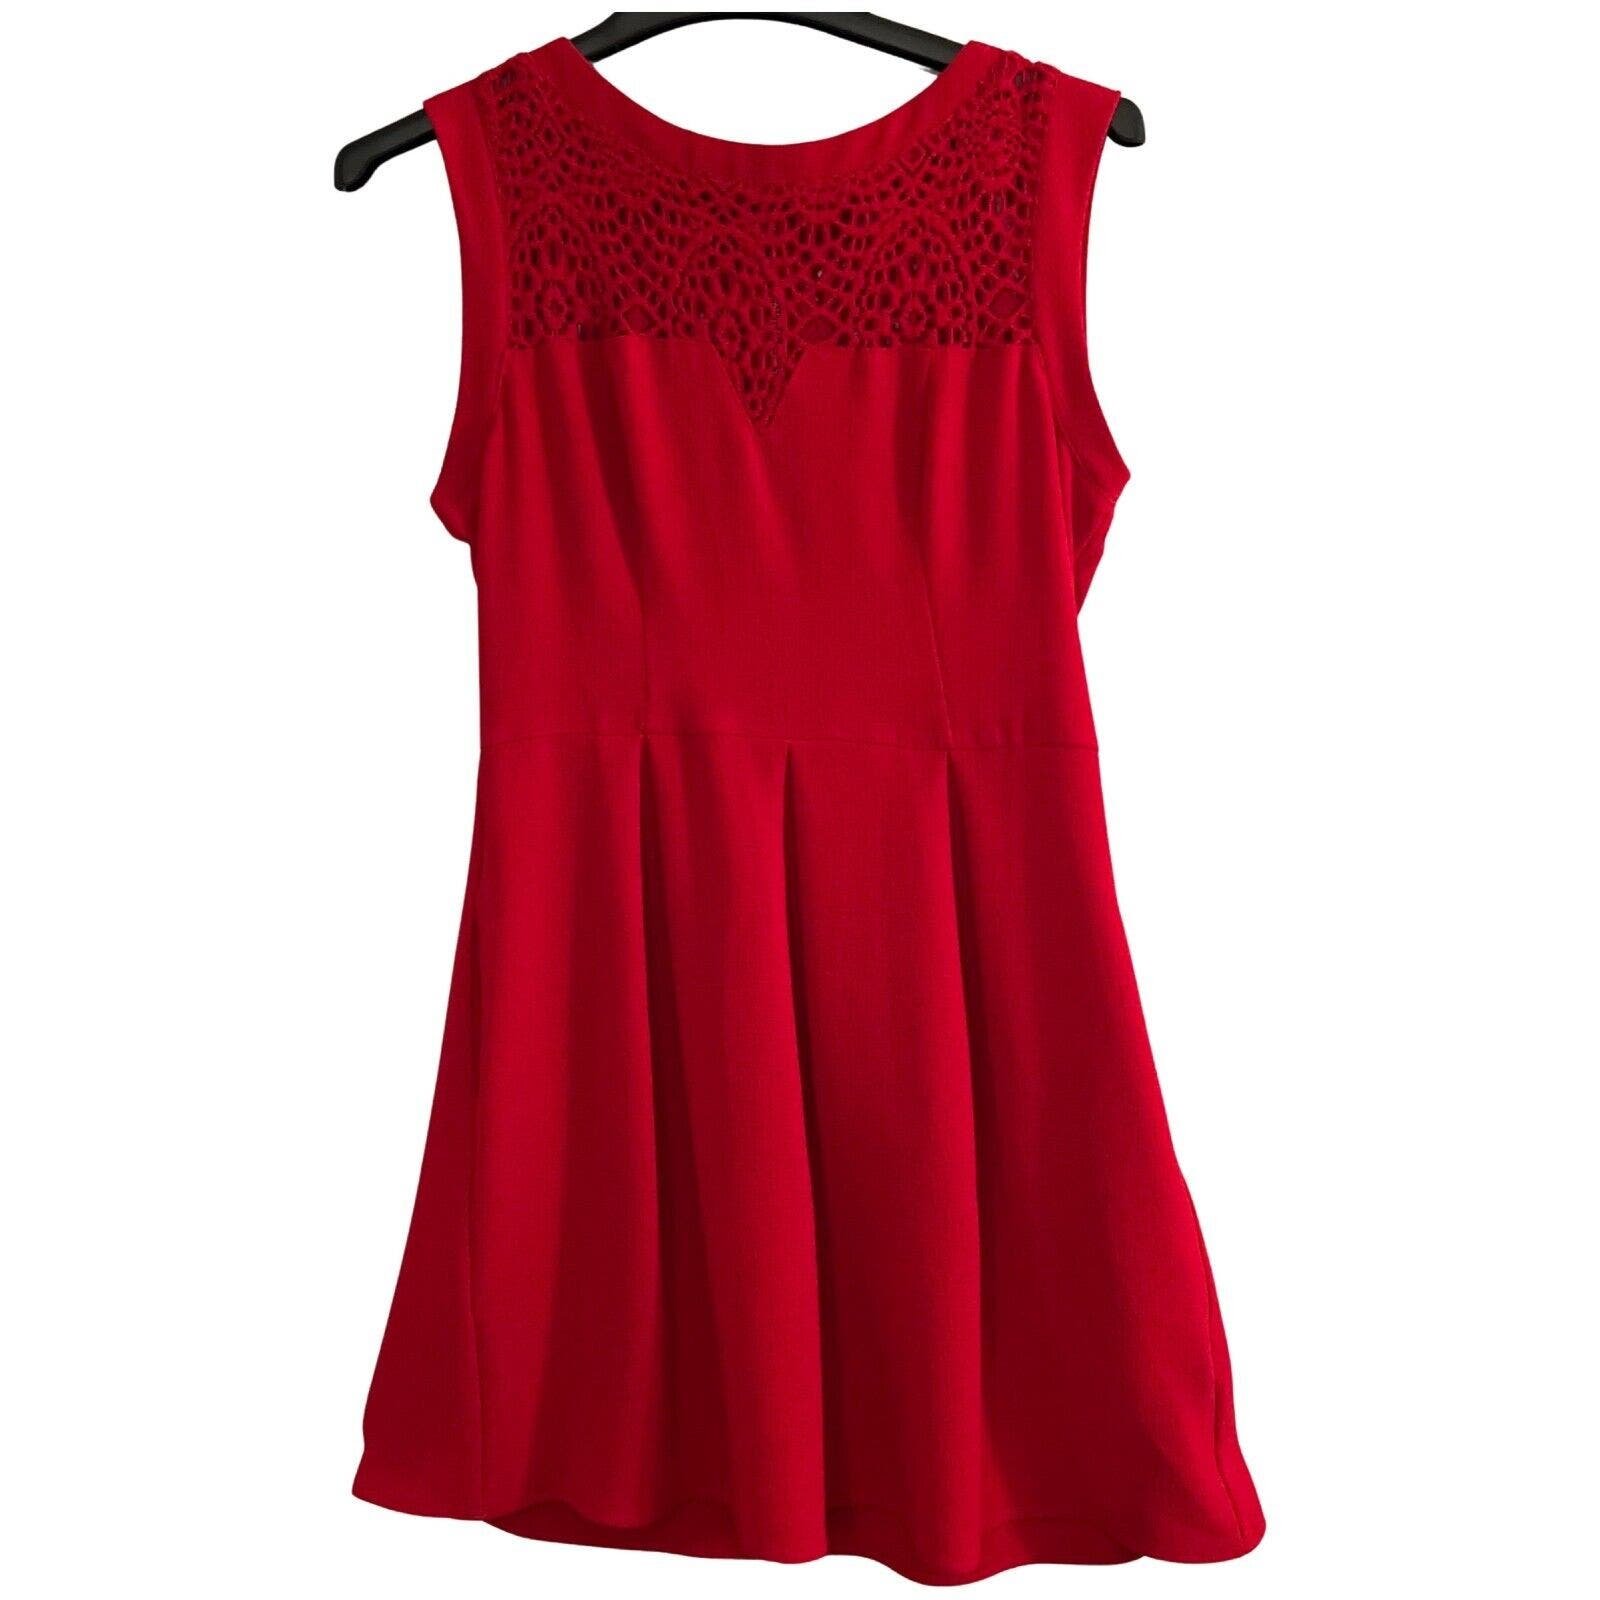 NWT SPEECHLESS Red Sleeveless Lace Bodice Fit and Flare